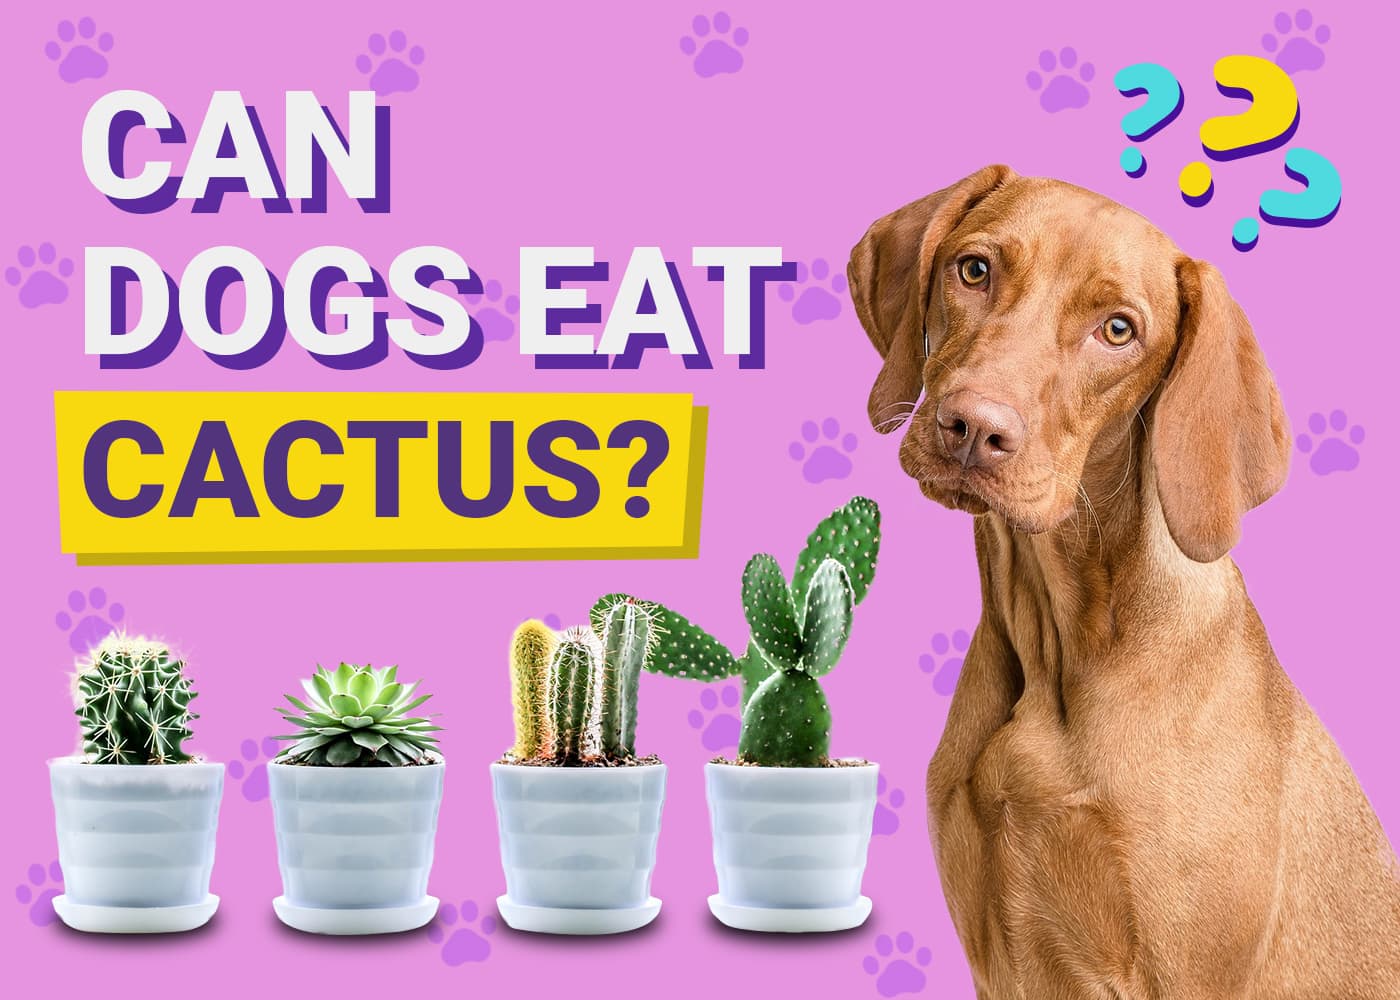 Can Dogs Eat Cactus